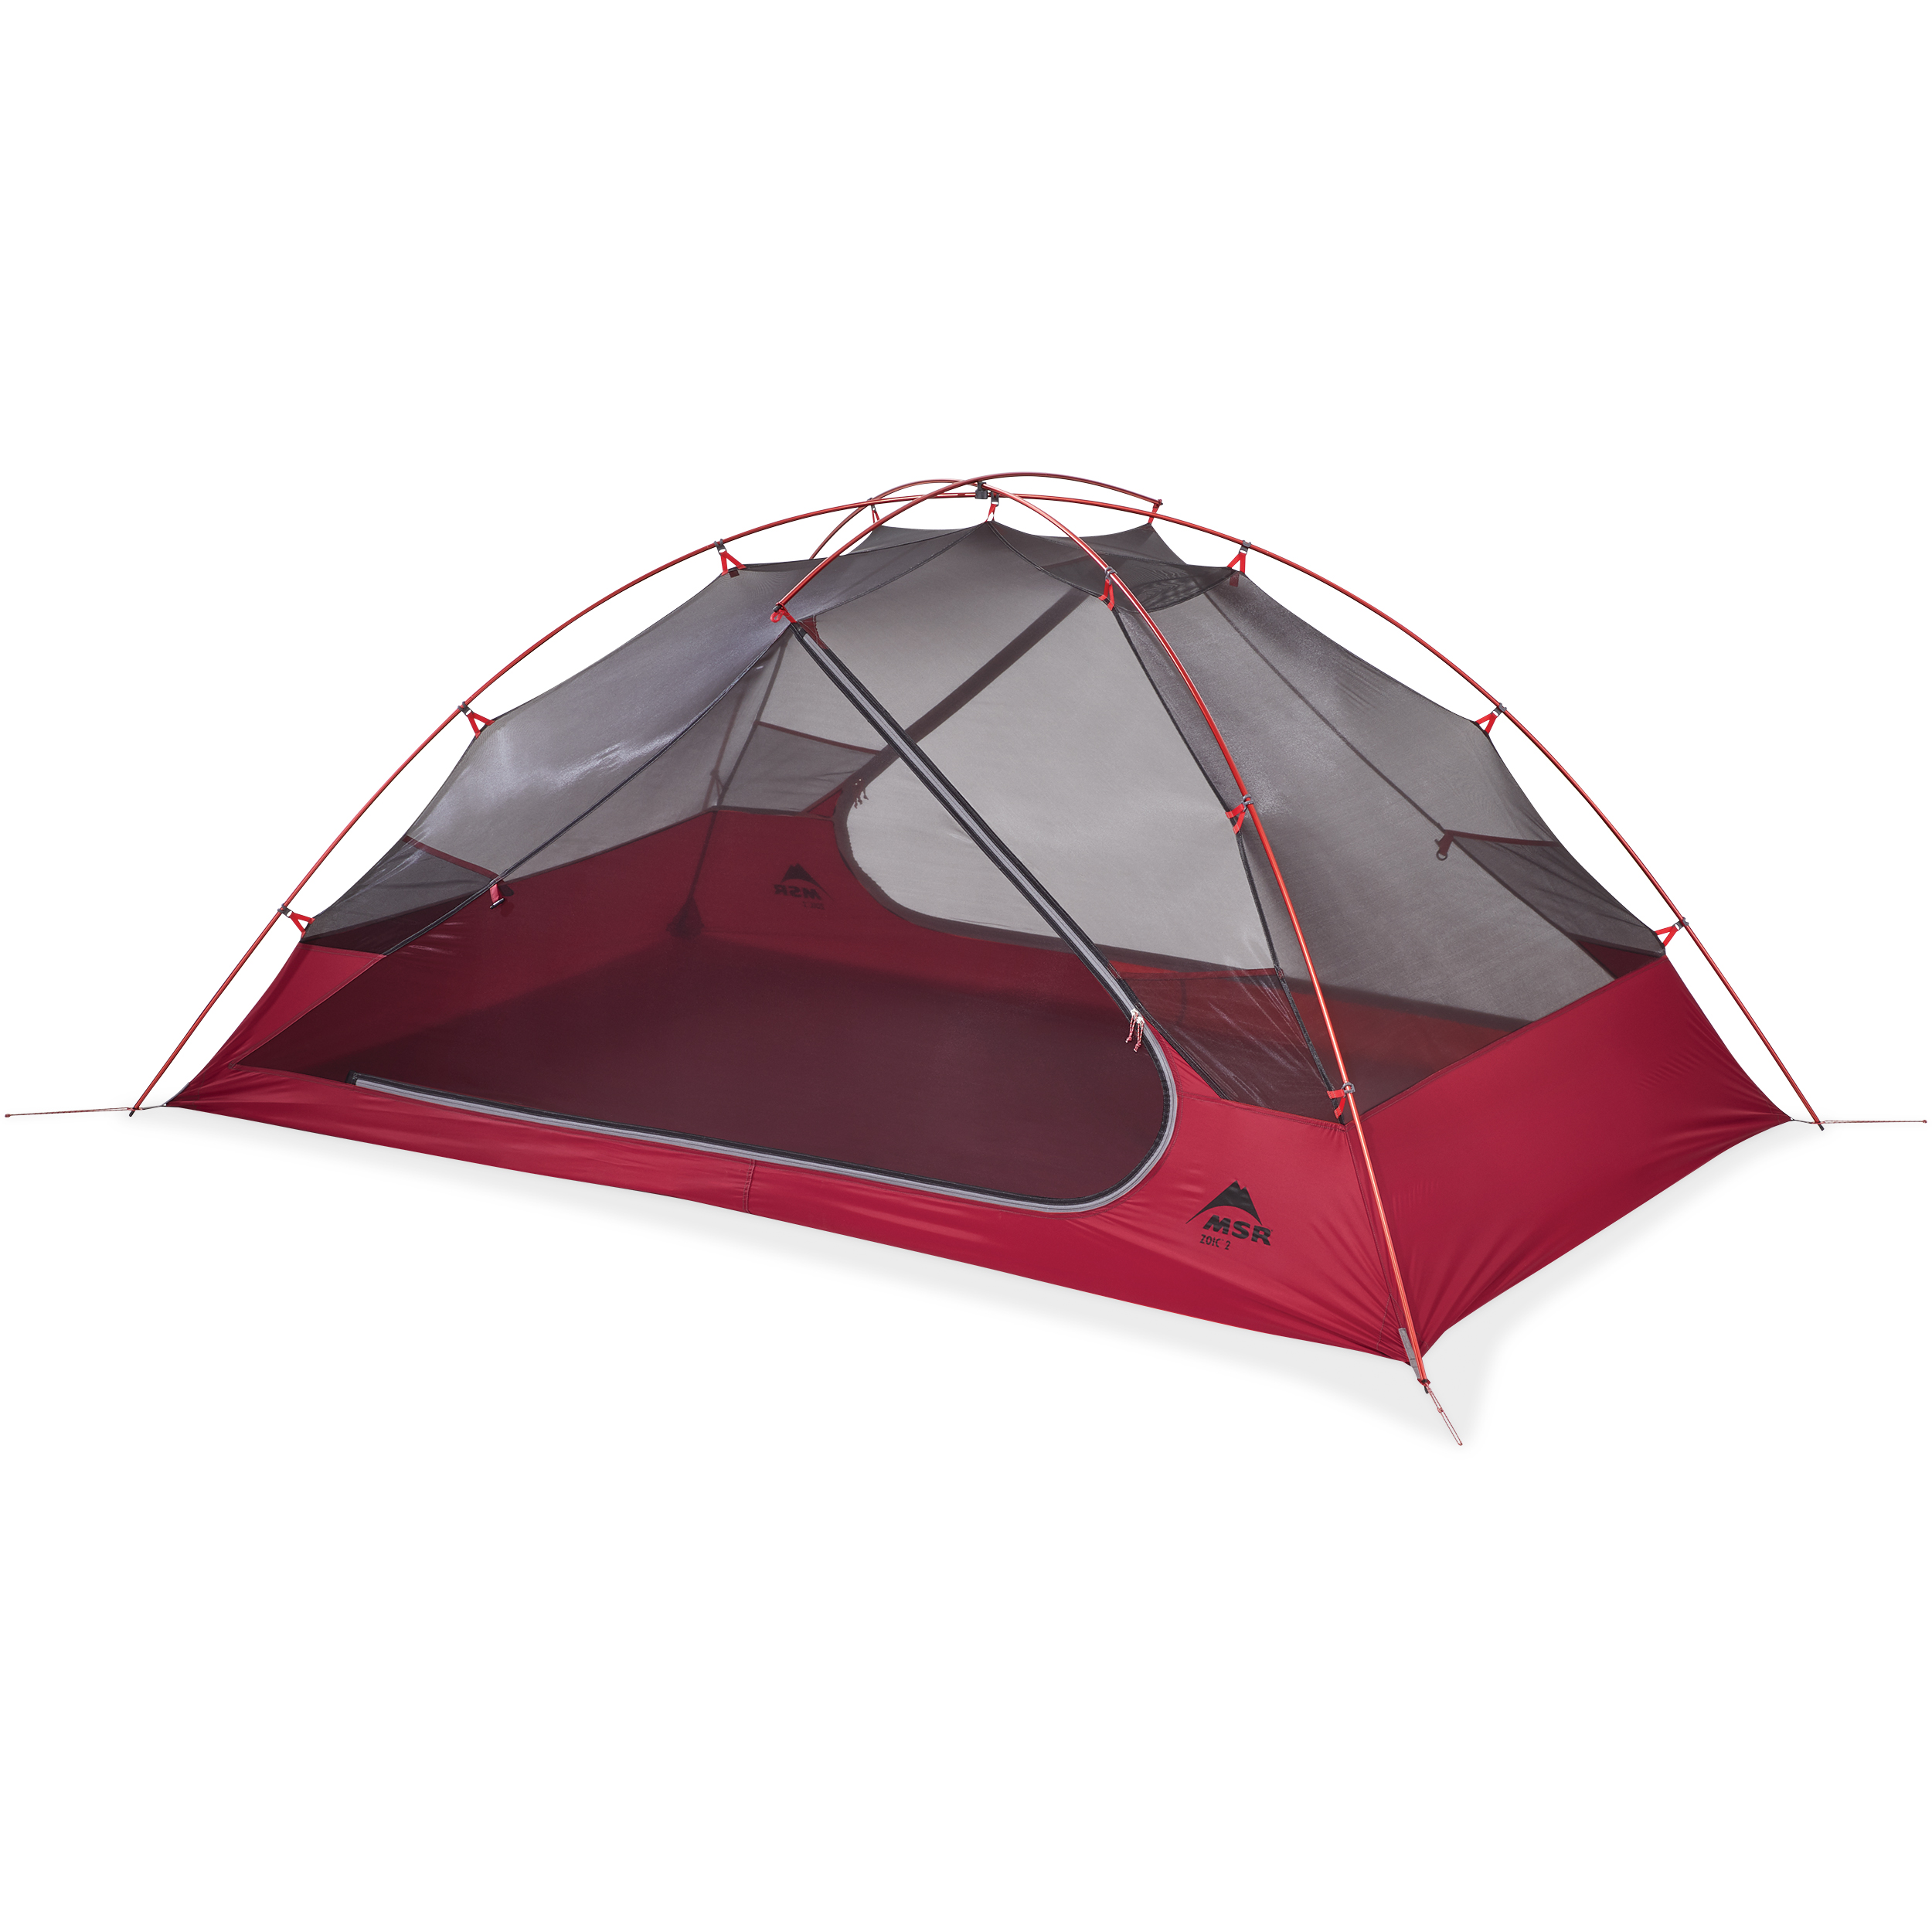 Zoic 2 Backpacking Tent Backpacking Tents Msr